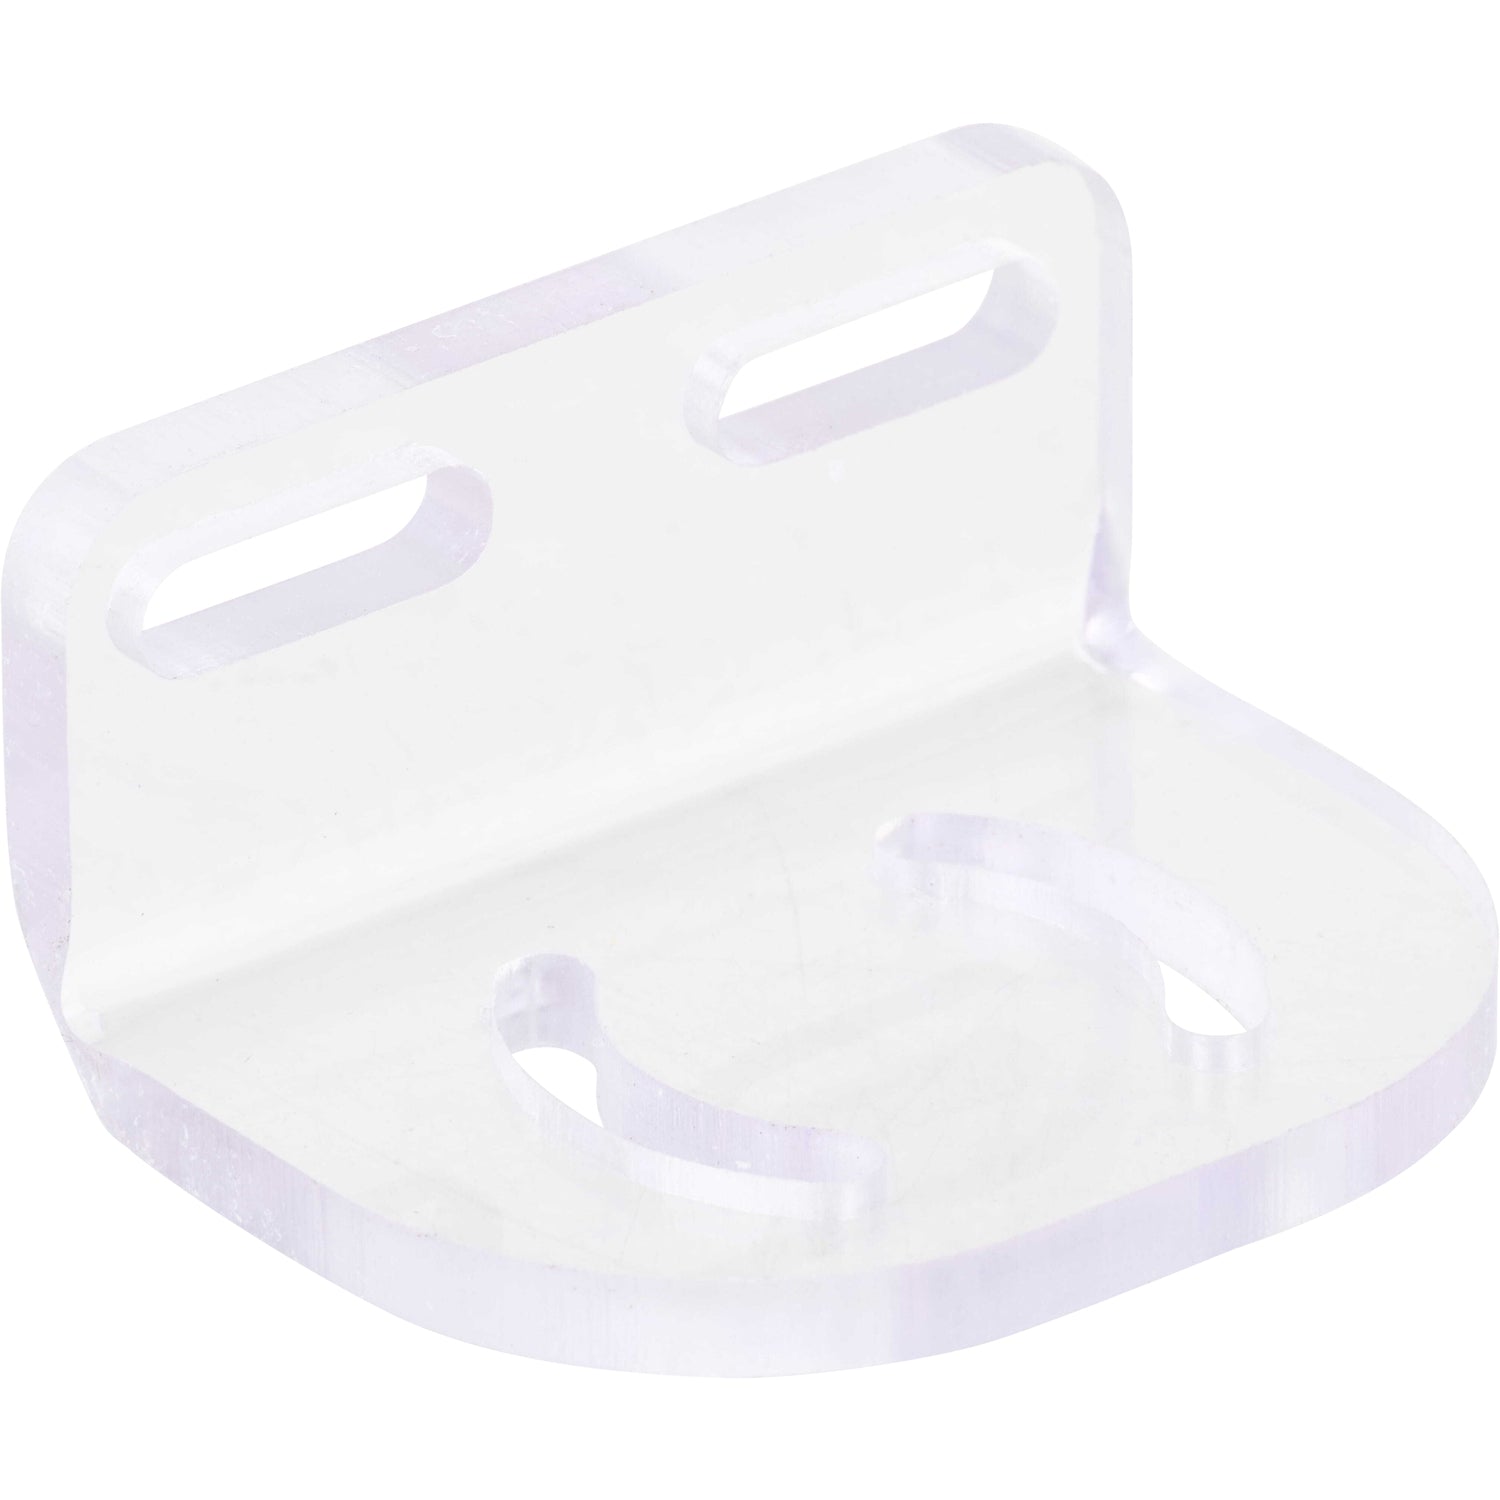 Bent, transparent polycarbonate part with four slotted holes.  Part shown on white background. 